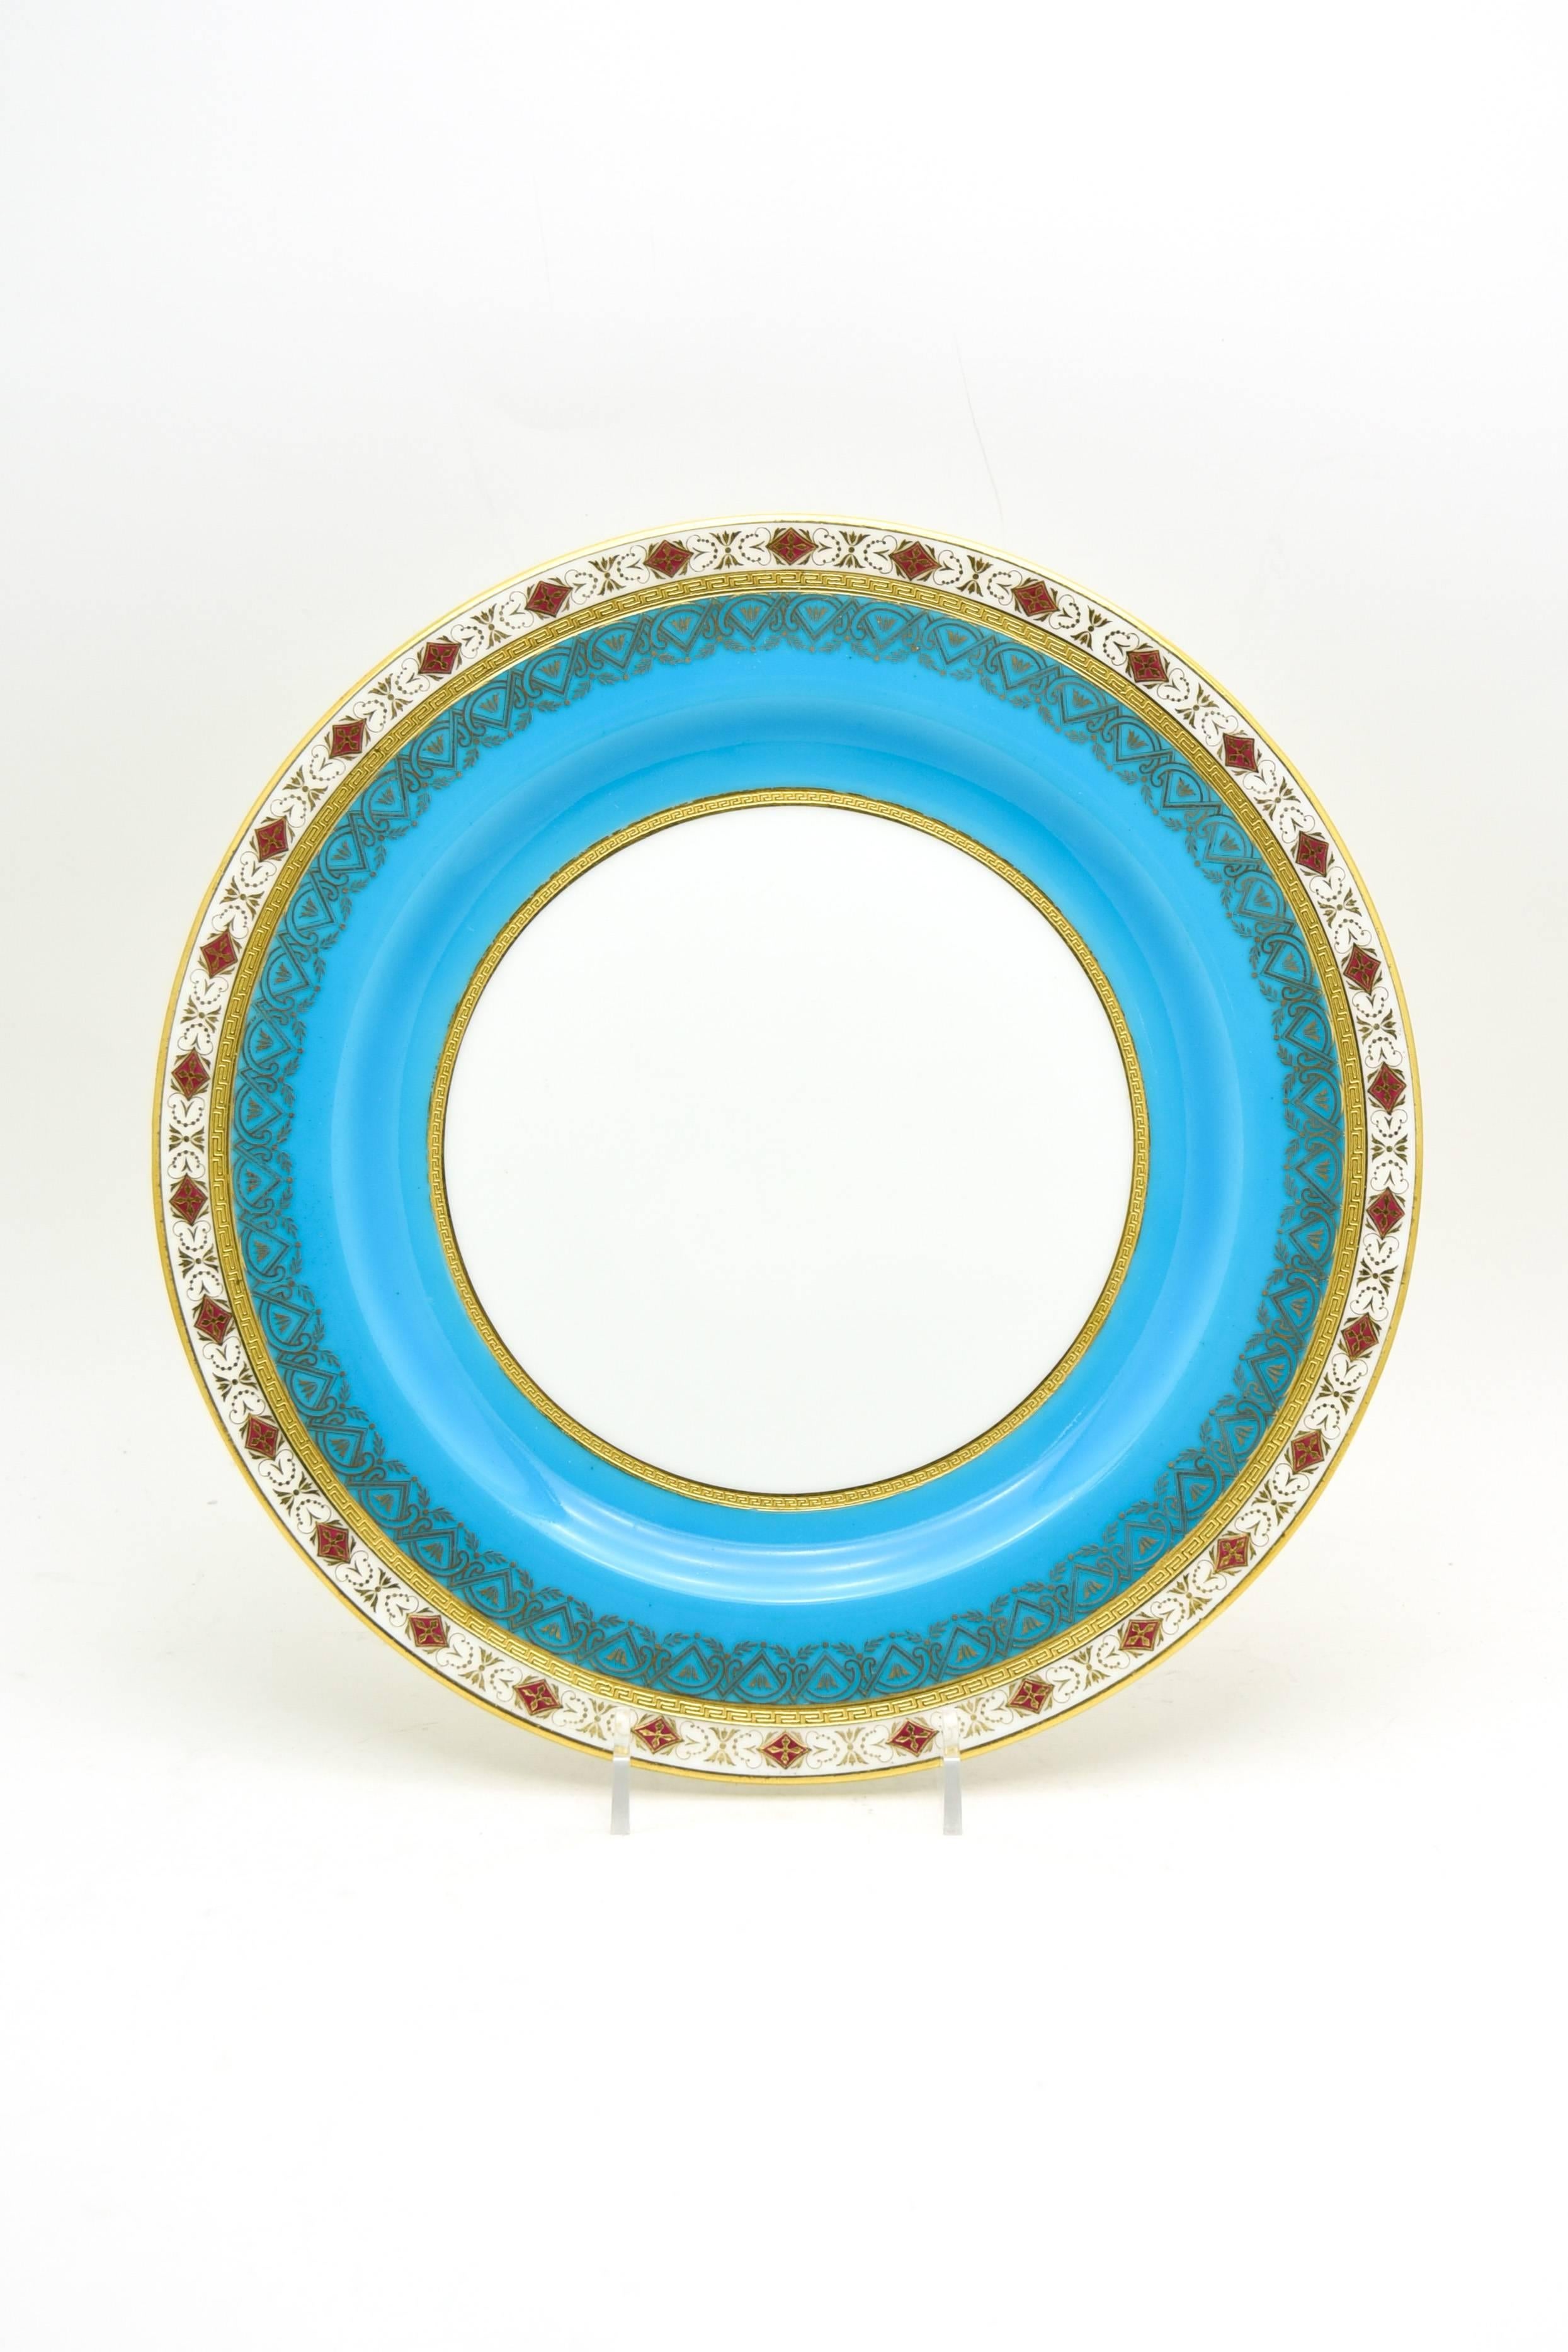 Neoclassical Set of 12 Minton Turquoise Dinner Plates with Red and Raised Gold Medallions